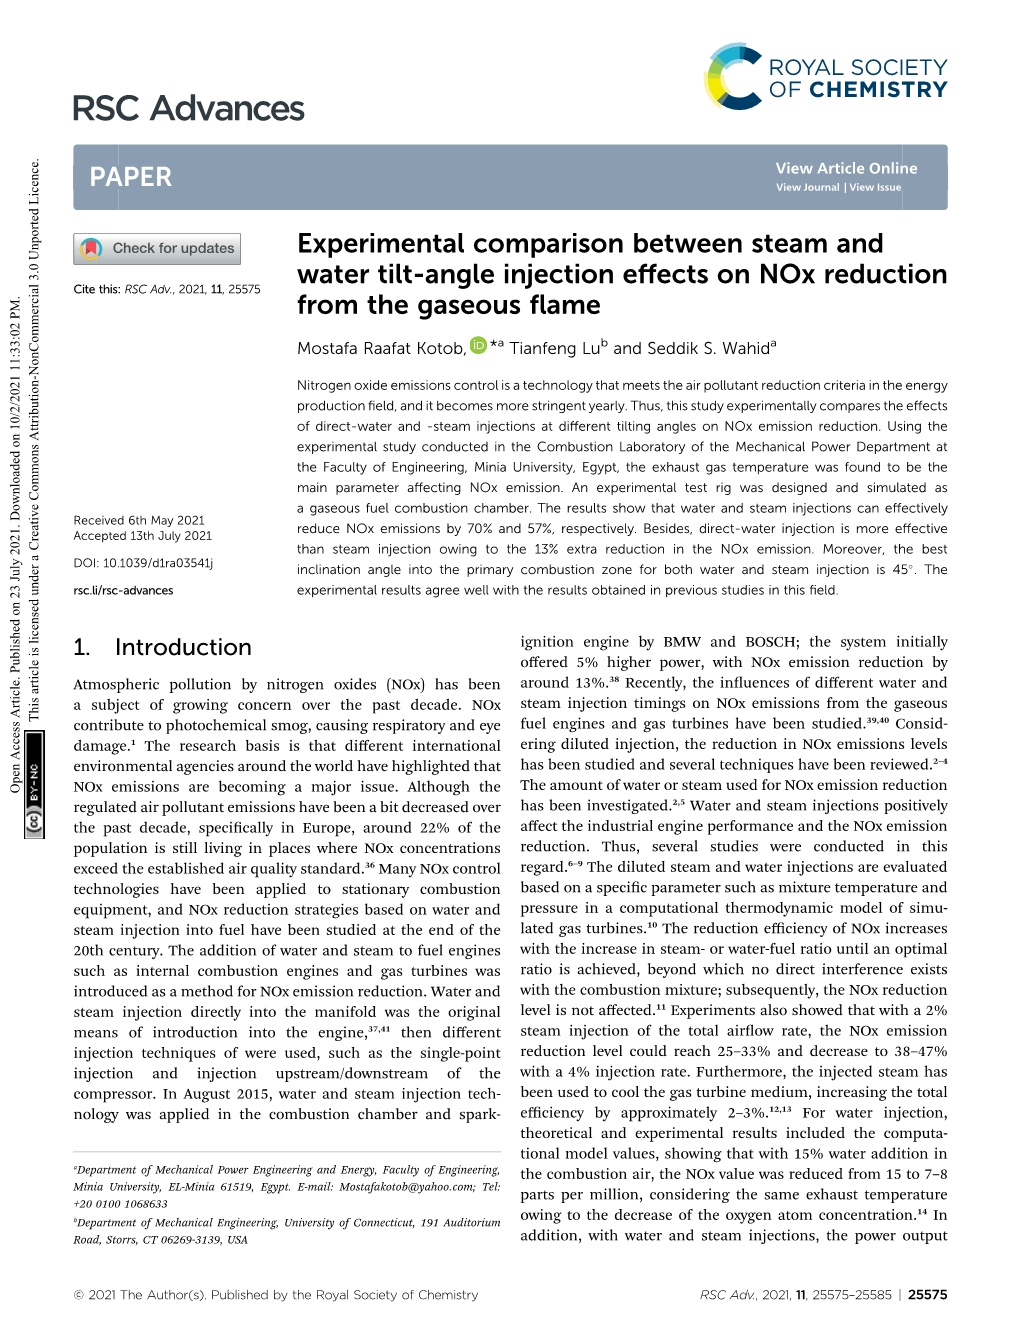 Experimental Comparison Between Steam and Water Tilt-Angle Injection Eﬀects on Nox Reduction Cite This: RSC Adv.,2021,11,25575 from the Gaseous ﬂame